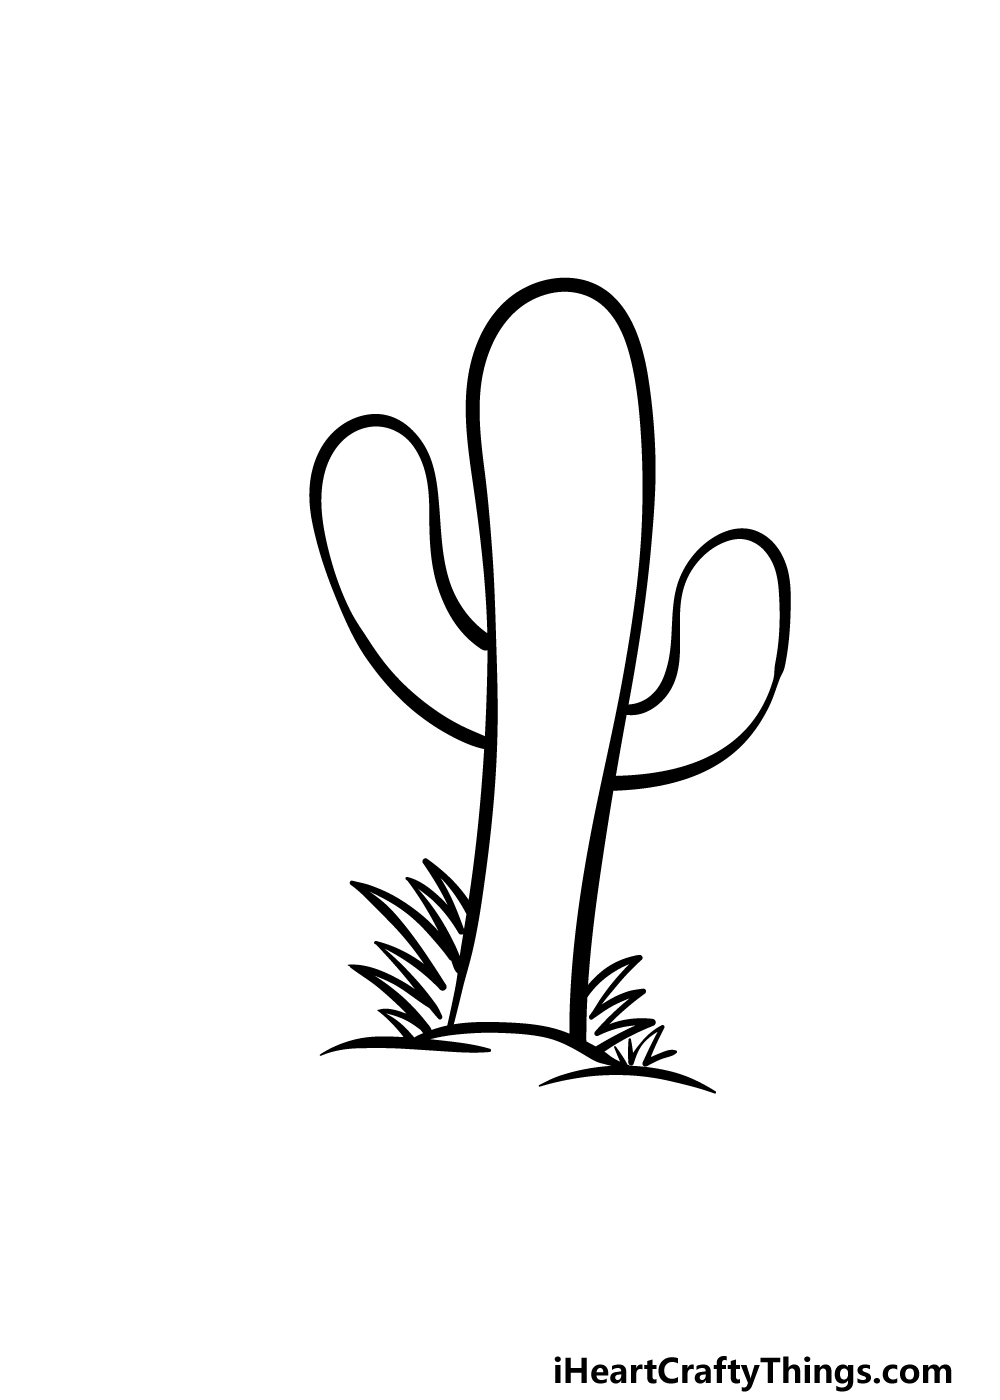 Cartoon Cactus Drawing - How To Draw A Cartoon Cactus Step By Step!